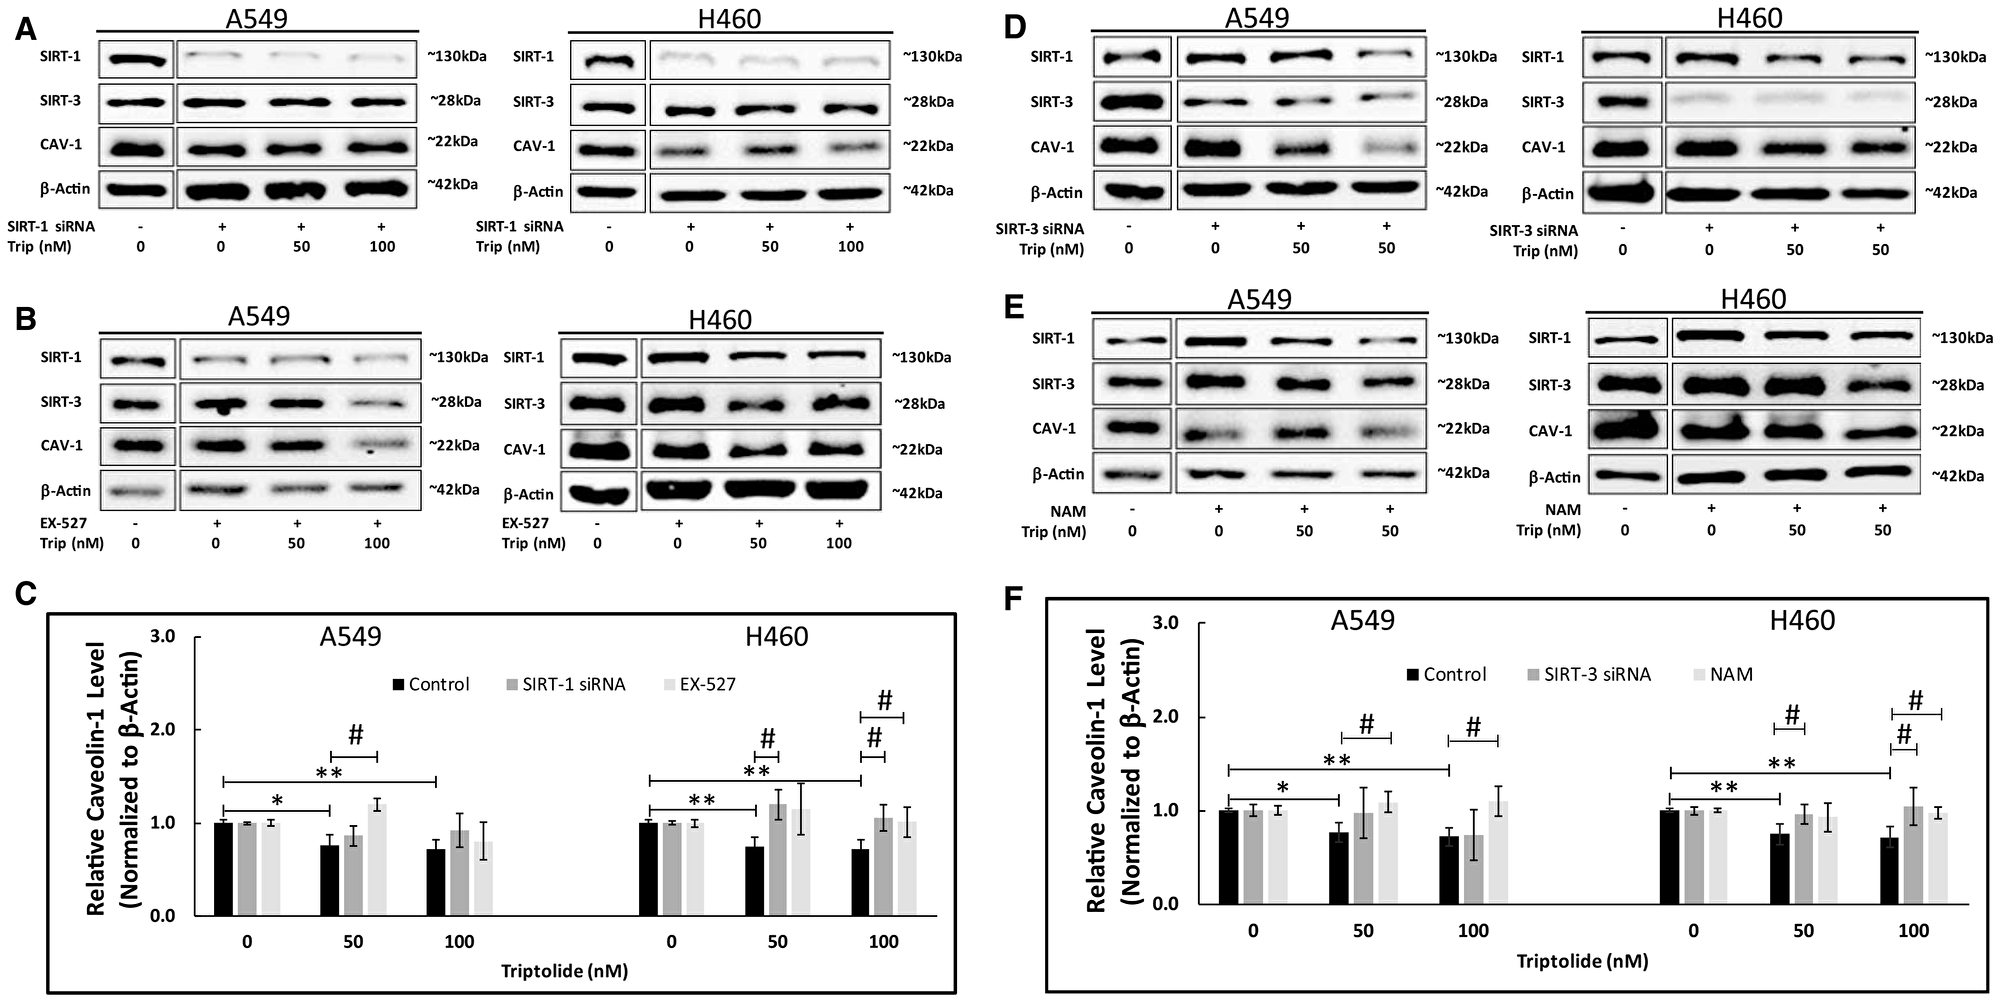 SIRT-1/-3 siRNA knockdown and EX-527/NAM treatment inhibited TL-induced downregulation of CAV-1 protein expression in NSCLC.